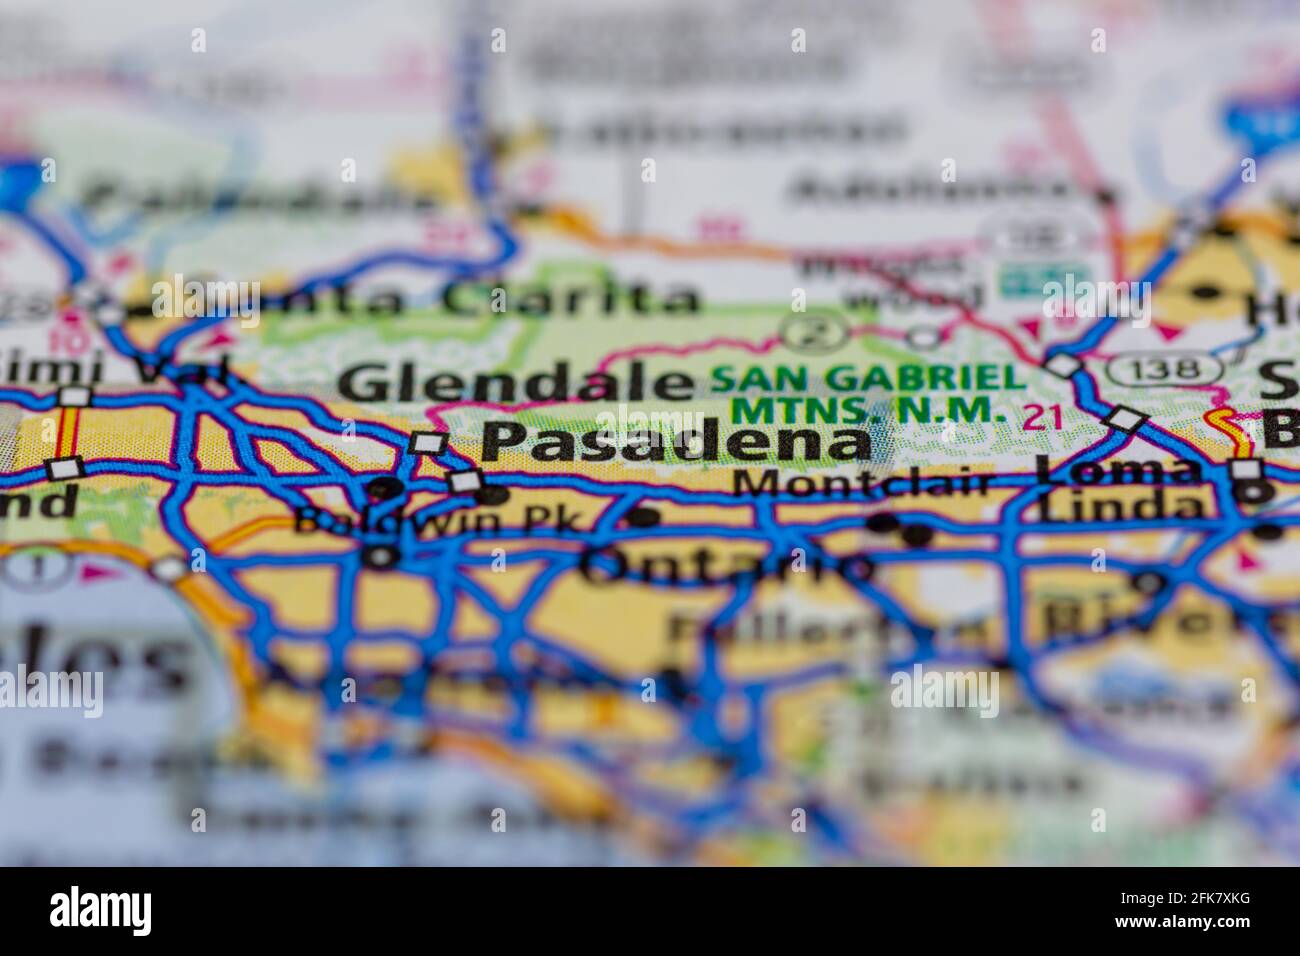 Pasadena California USA shown on a Geography map or road map Stock Photo